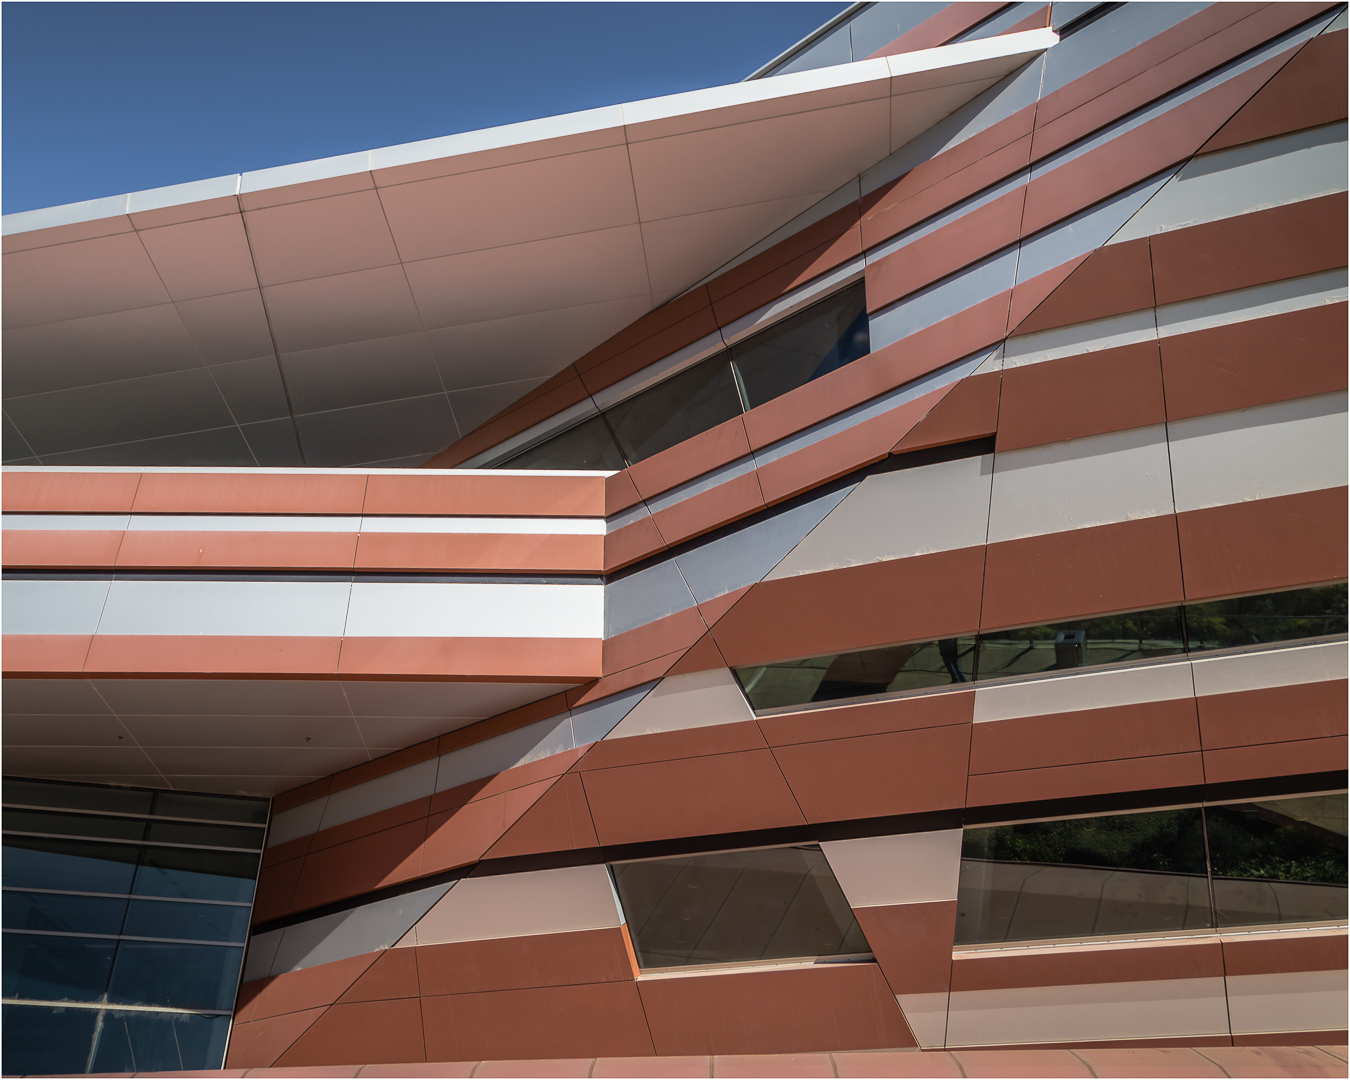 Fred Tiong Adelaide Convention Centre No. 2 Highly Commended May 2019   Architecture